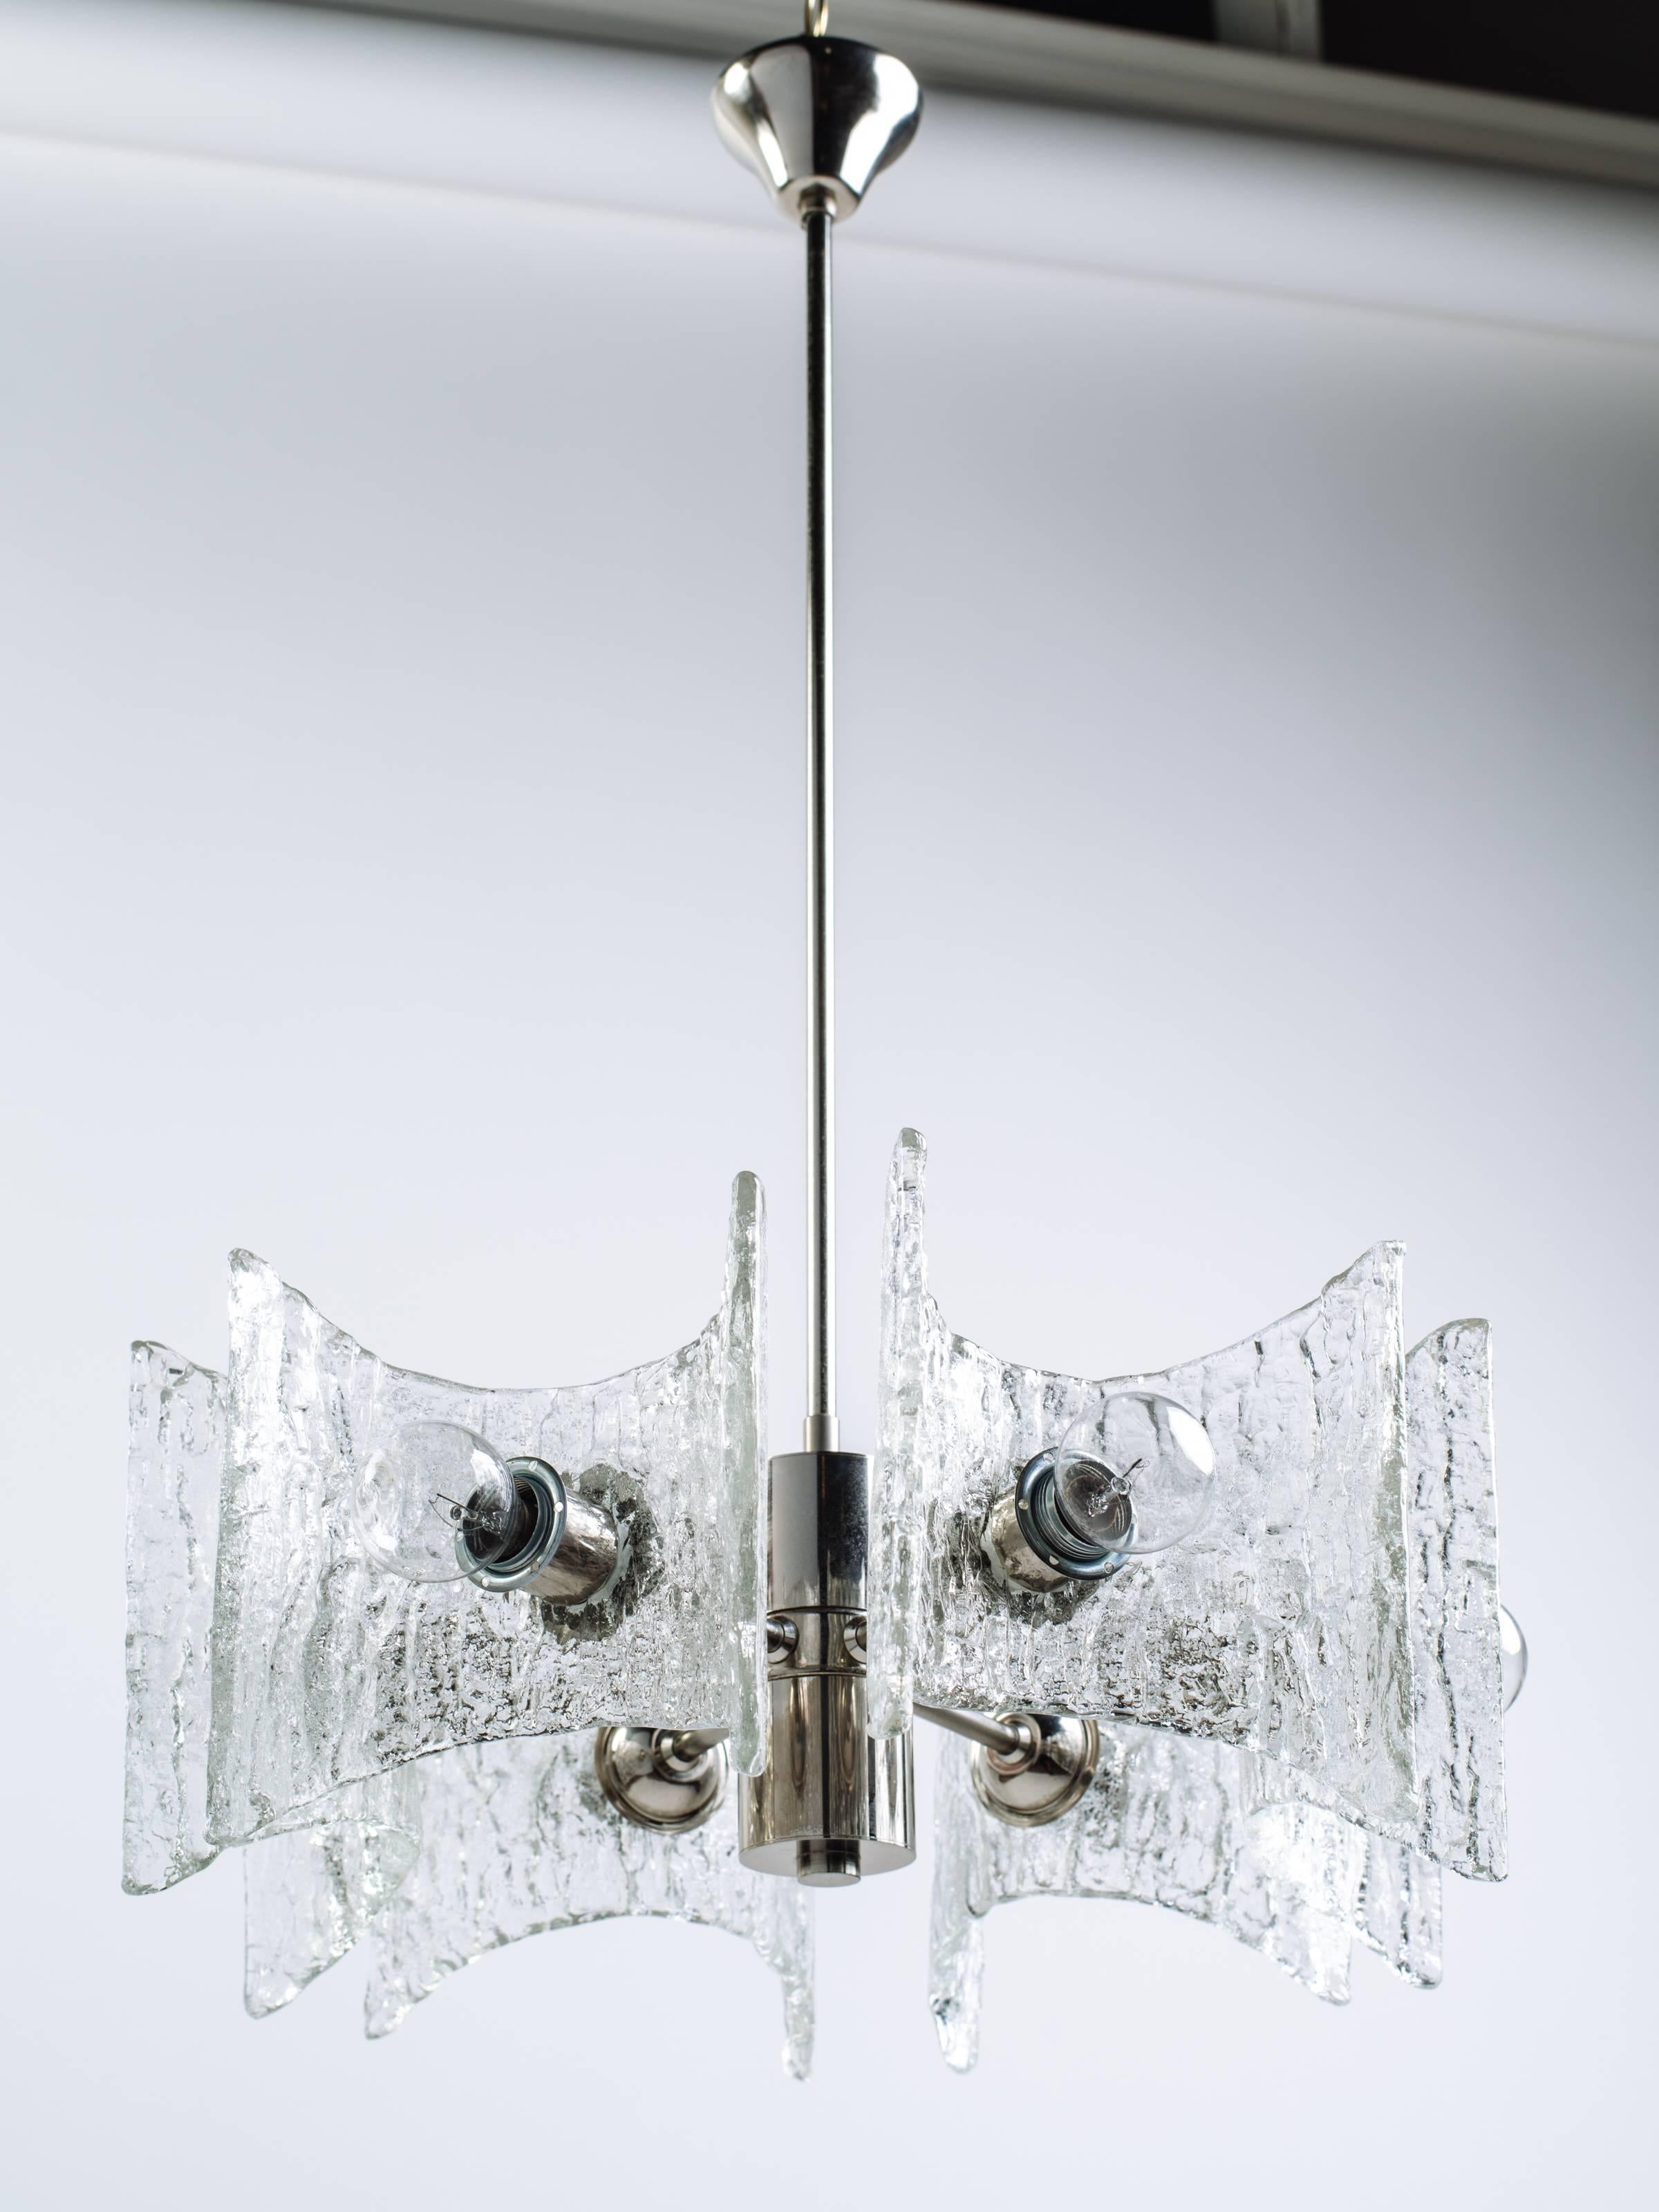 Modernist chrome chandelier with brilliant textured glass design. The chandelier is fitted with six lights and six handblown shades with curved design and stylized pointed corners.